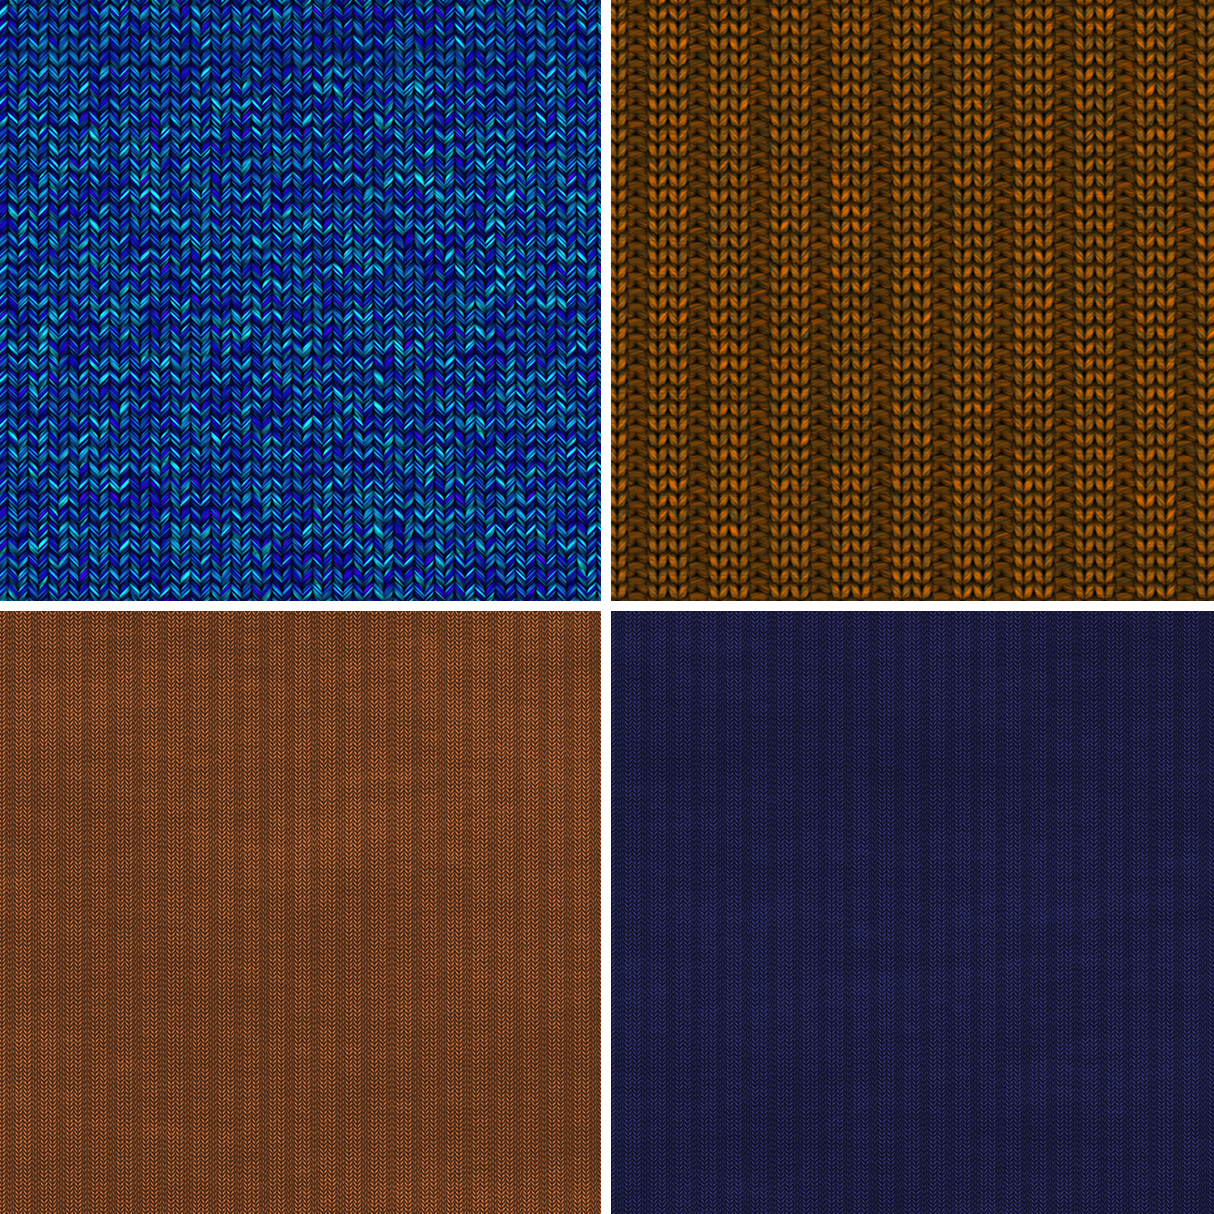 30 Knitted Background Textures Samples Preview – Part 3